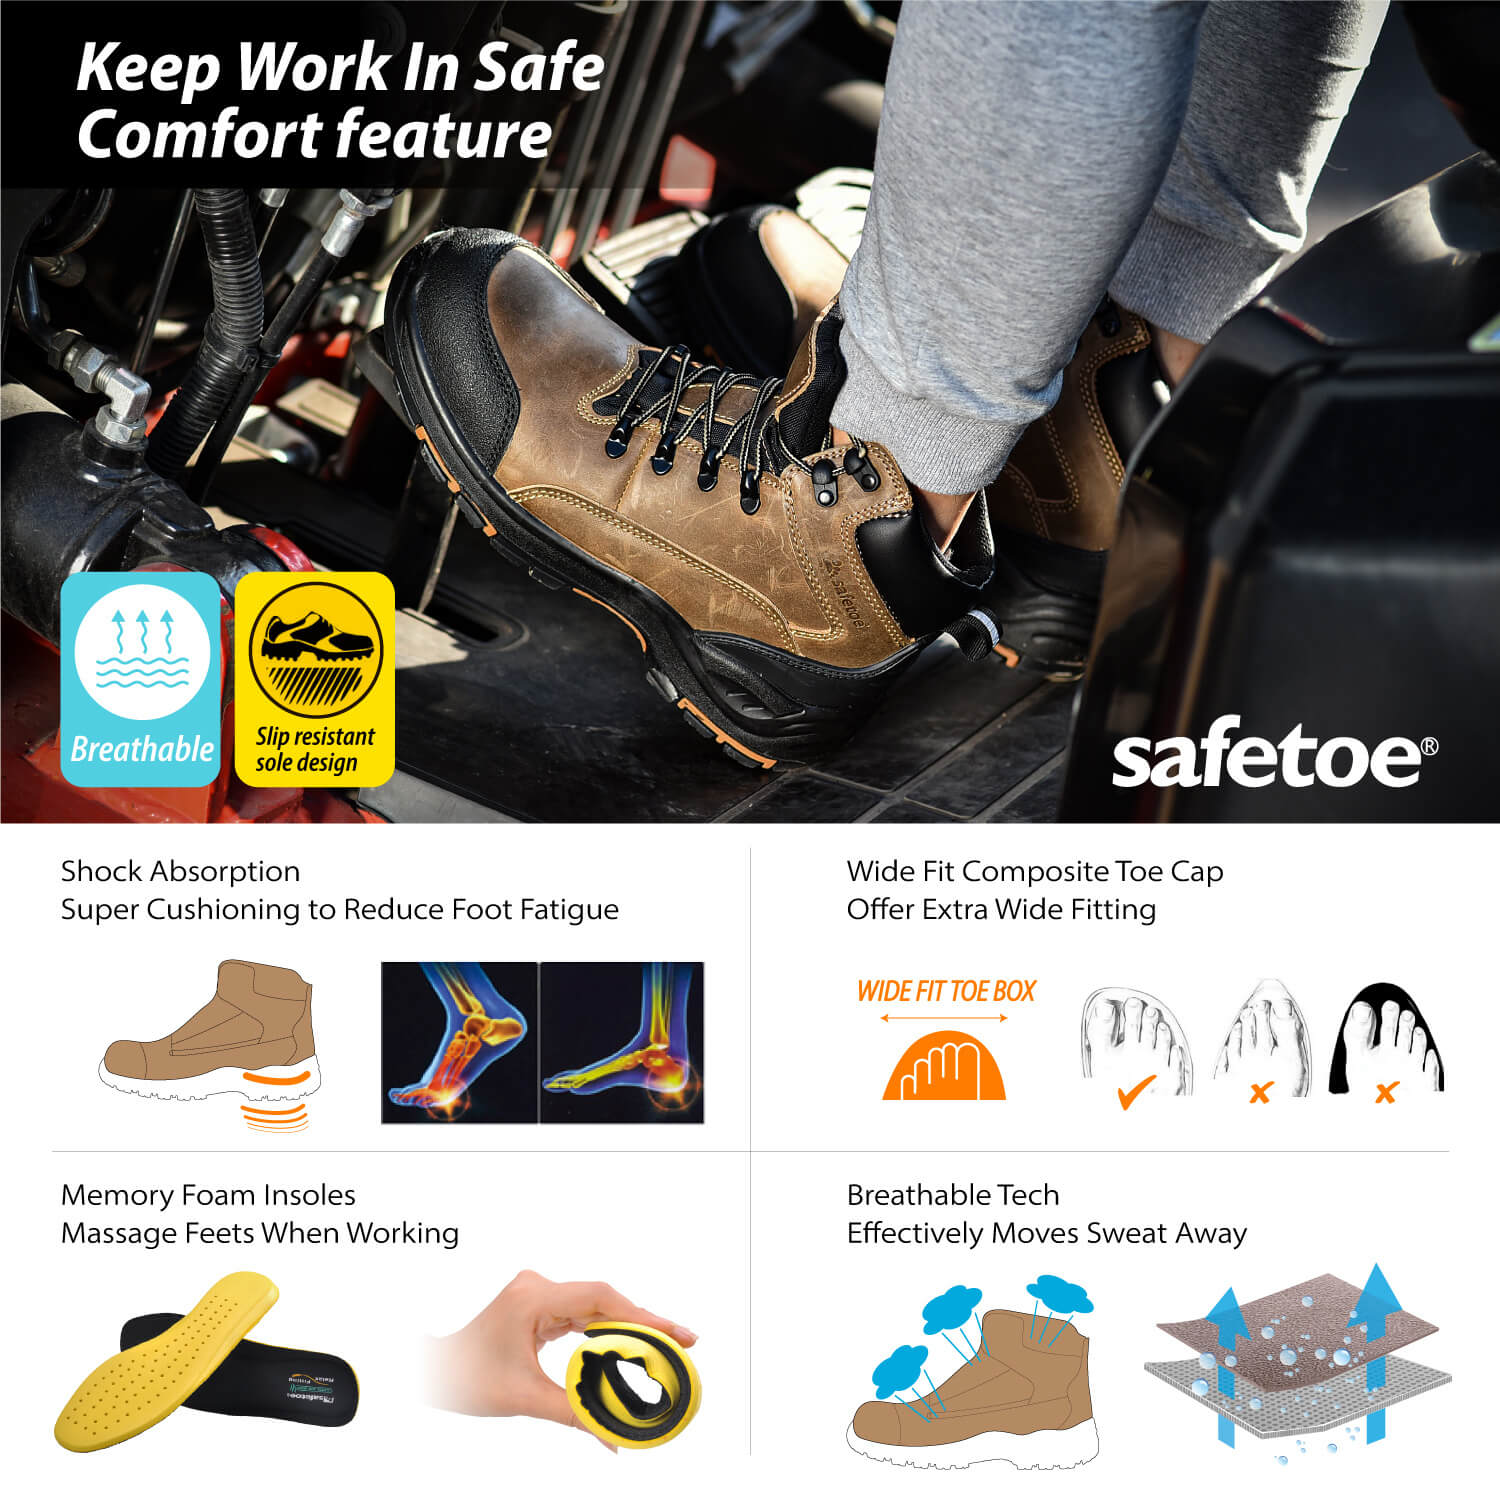 Safetoe S3 Safety Boots Genuine Cow Leather Safety Work Boots with Composite Toe